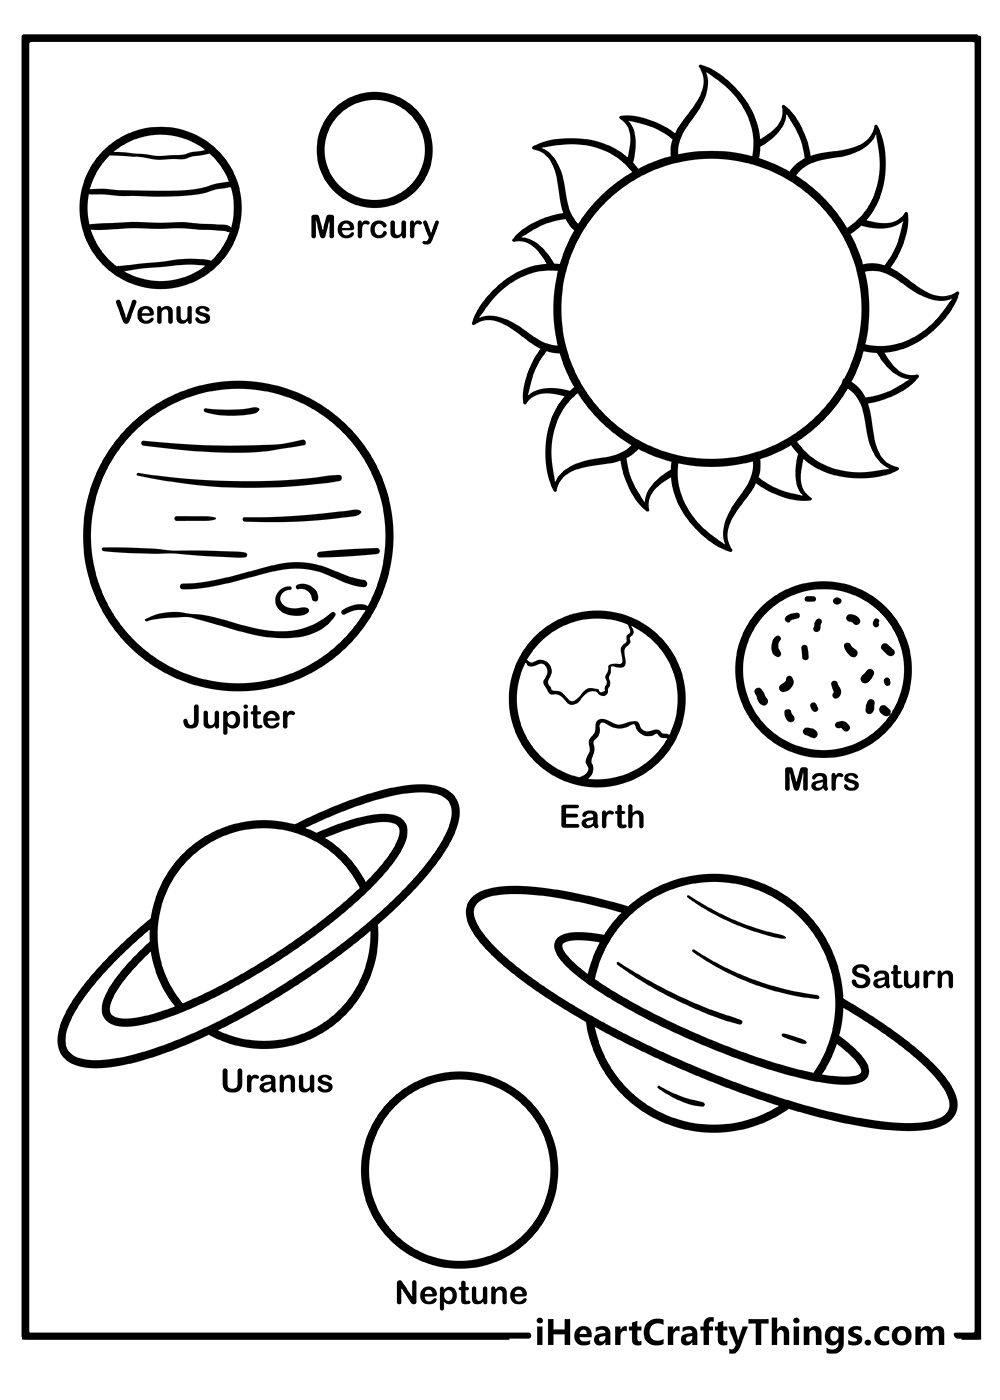 Instant Download Printable Space Activities for Kids Space Colouring Book Kids Space Activity Book